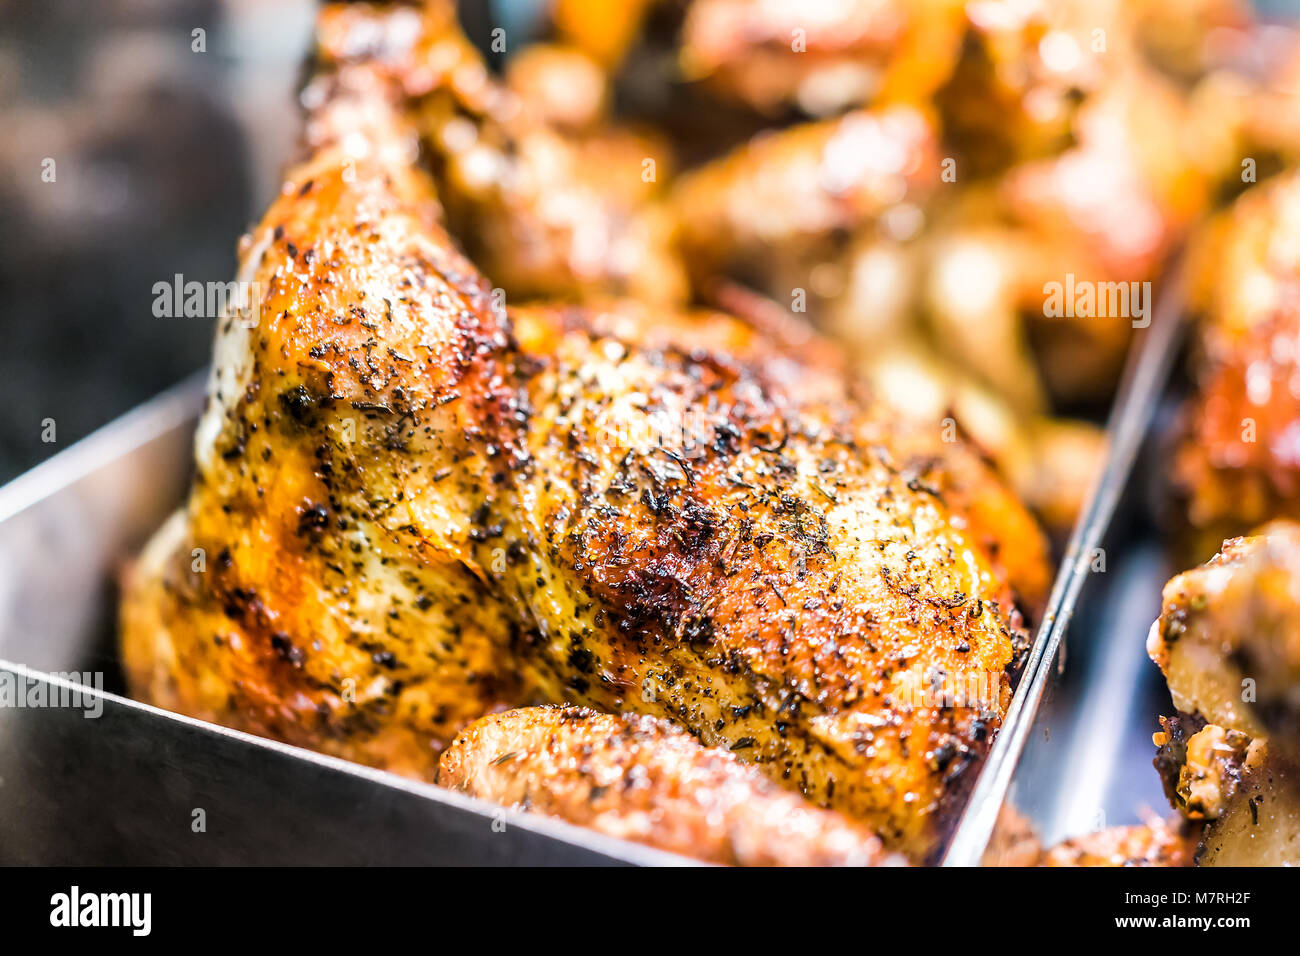 Macro closeup of roasted whole chicken brown with herbs, spices, crispy golden skin on tray in deli store shop grocery display Stock Photo